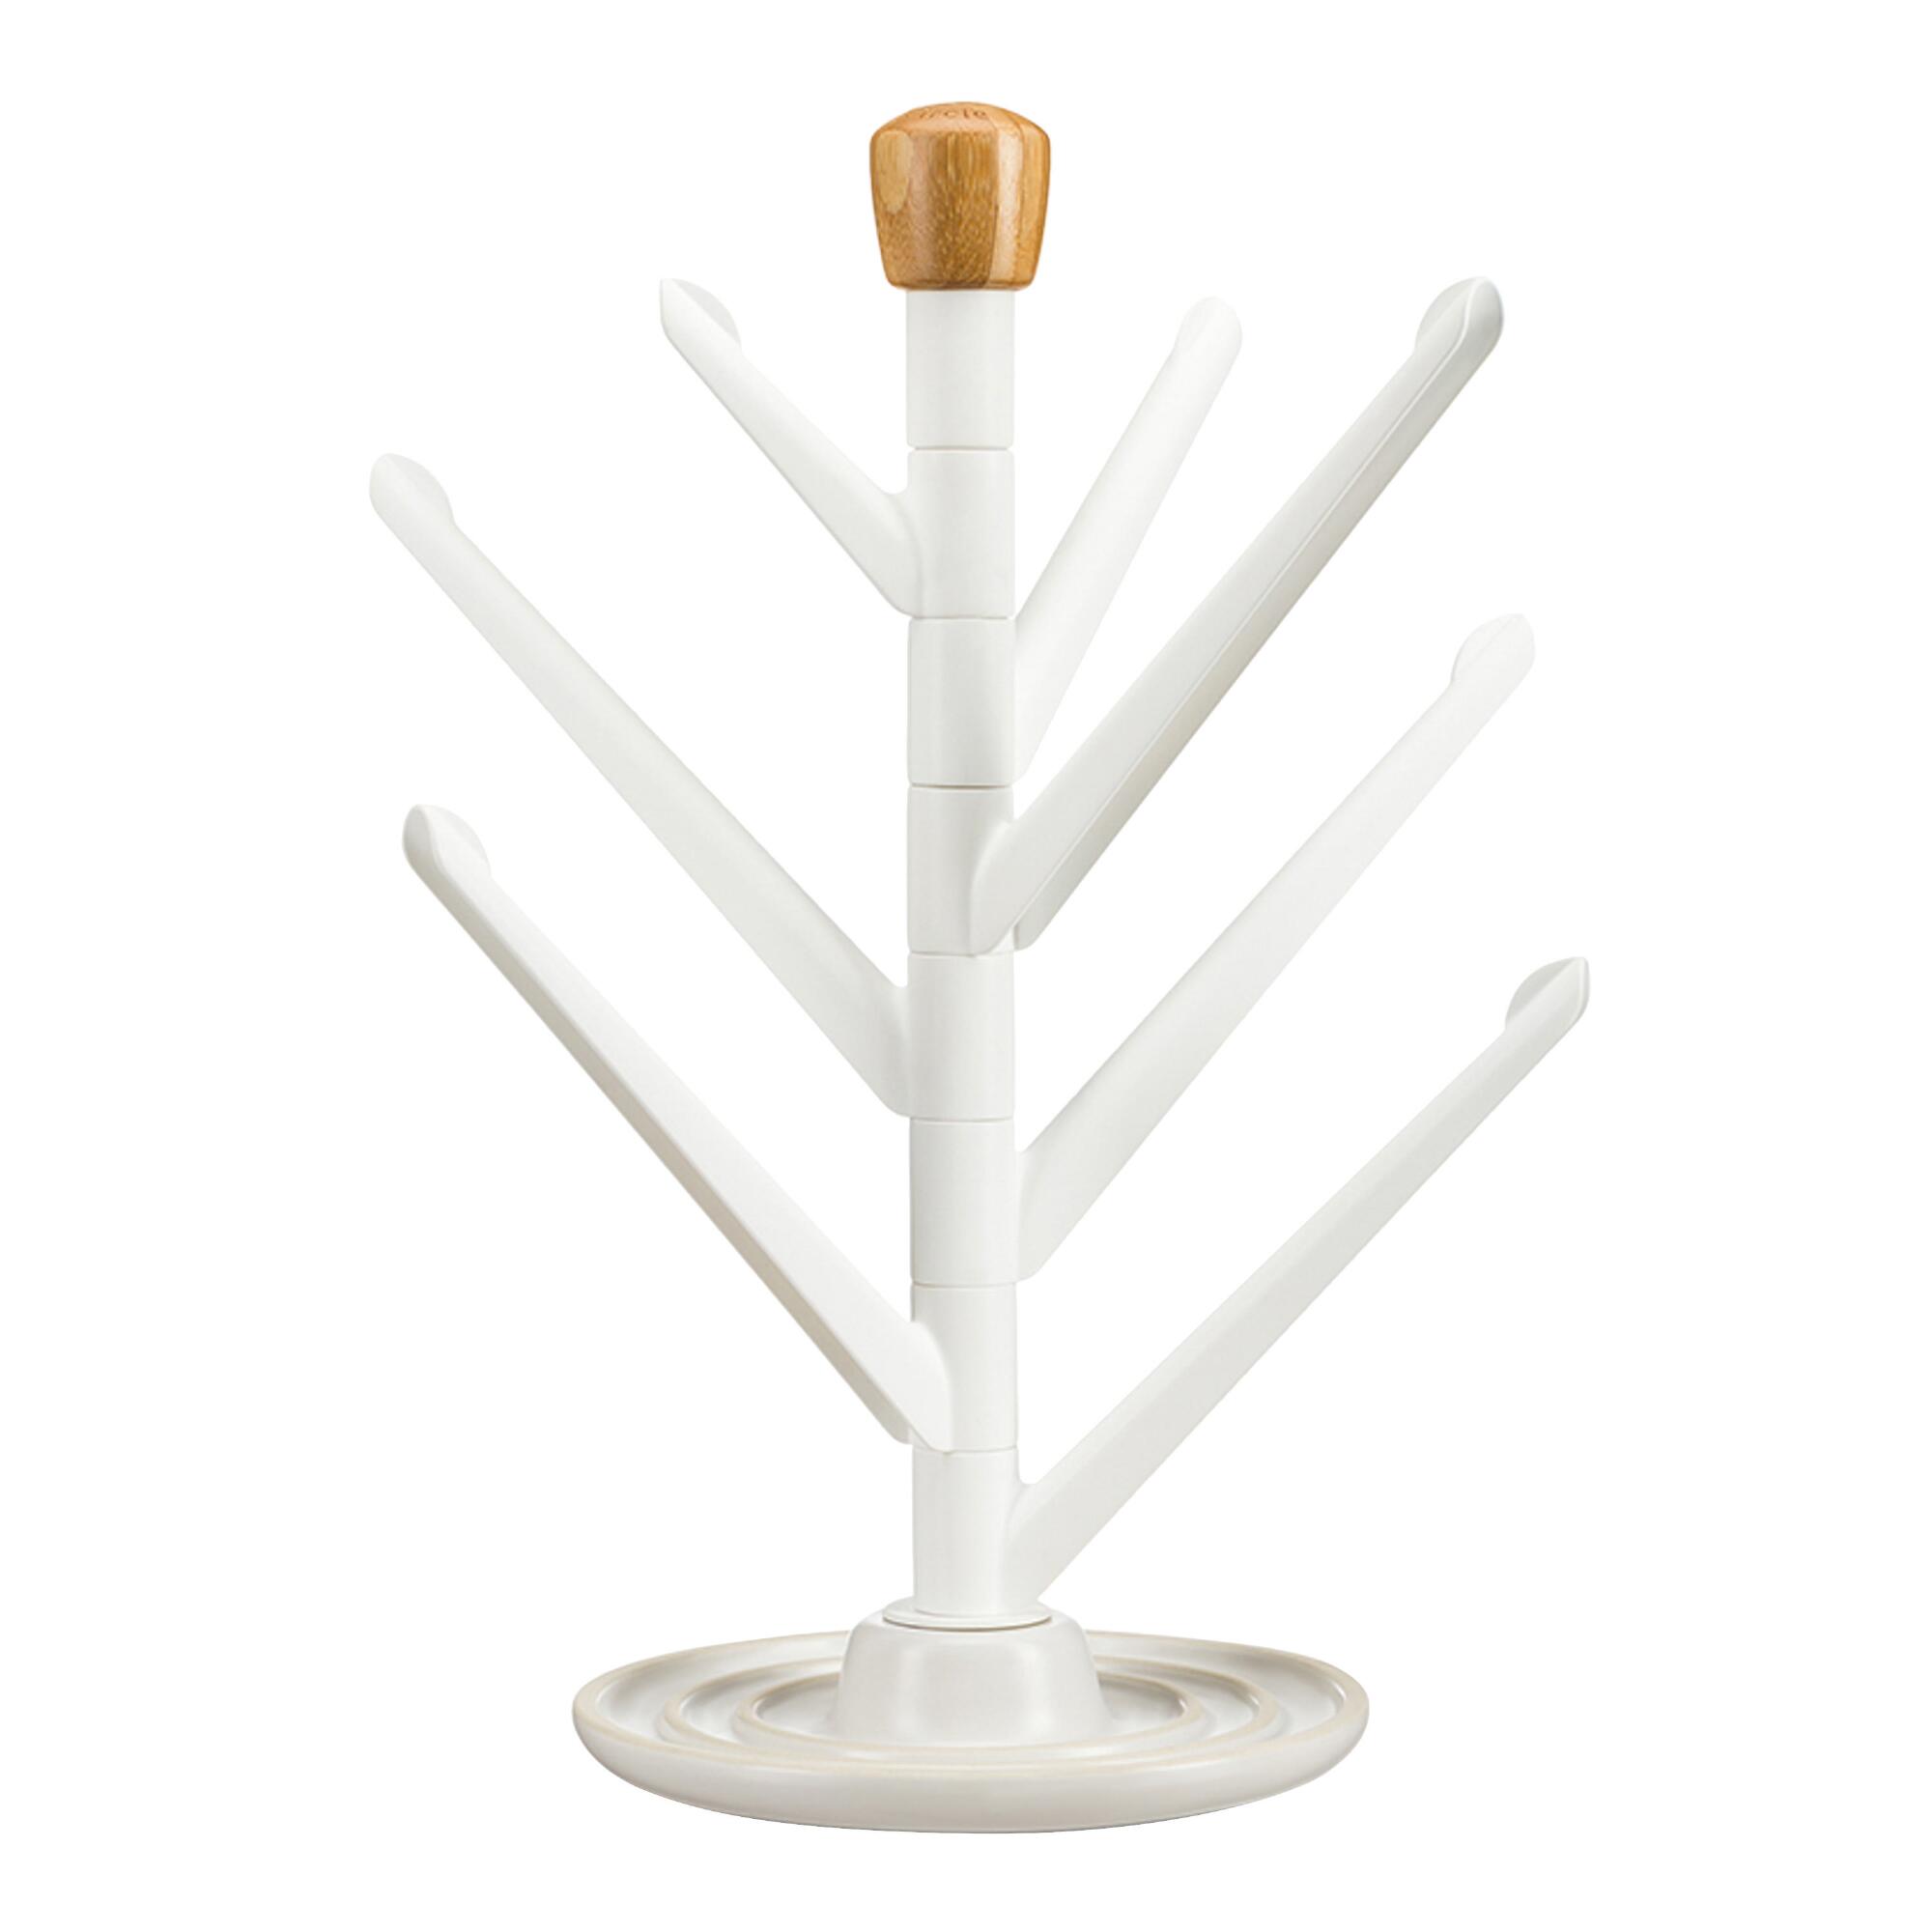 Full Circle Branch Out Upright Drying Rack: White - Plastic by World Market